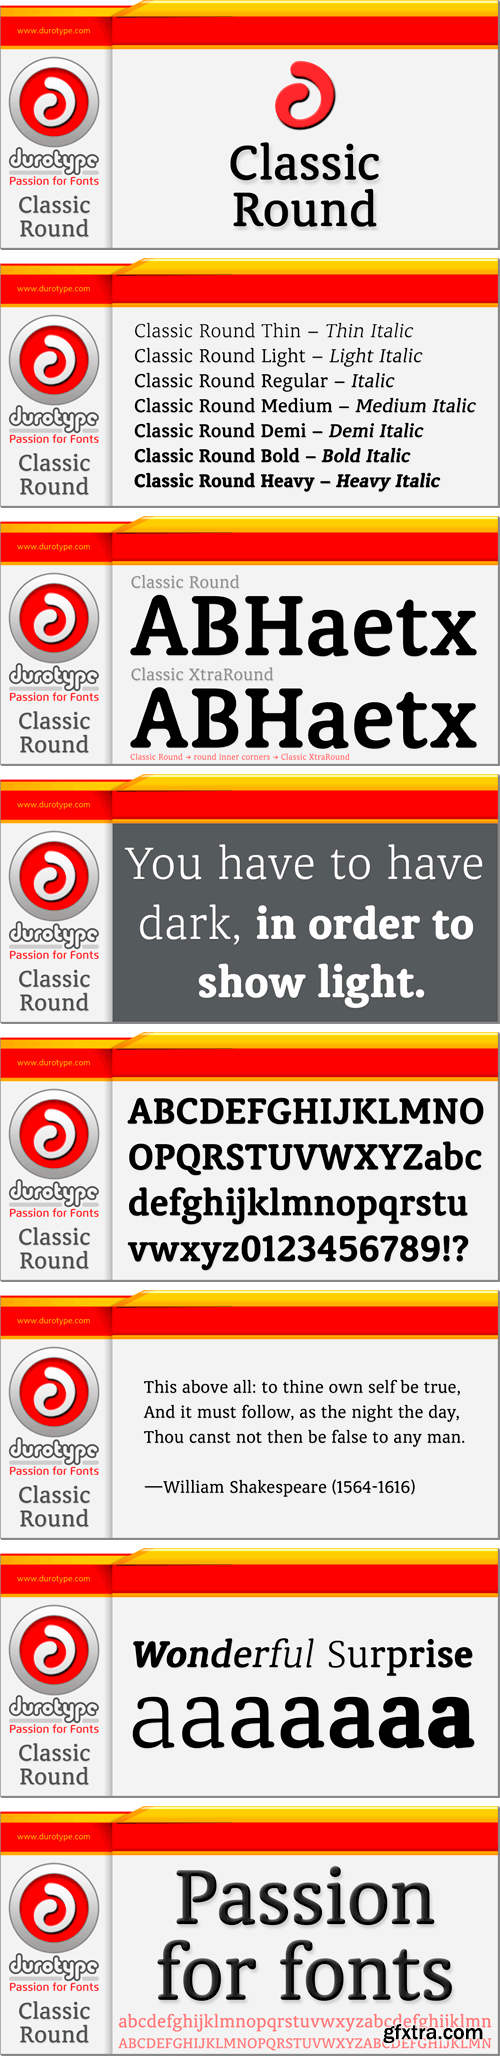 Classic Round Font Family